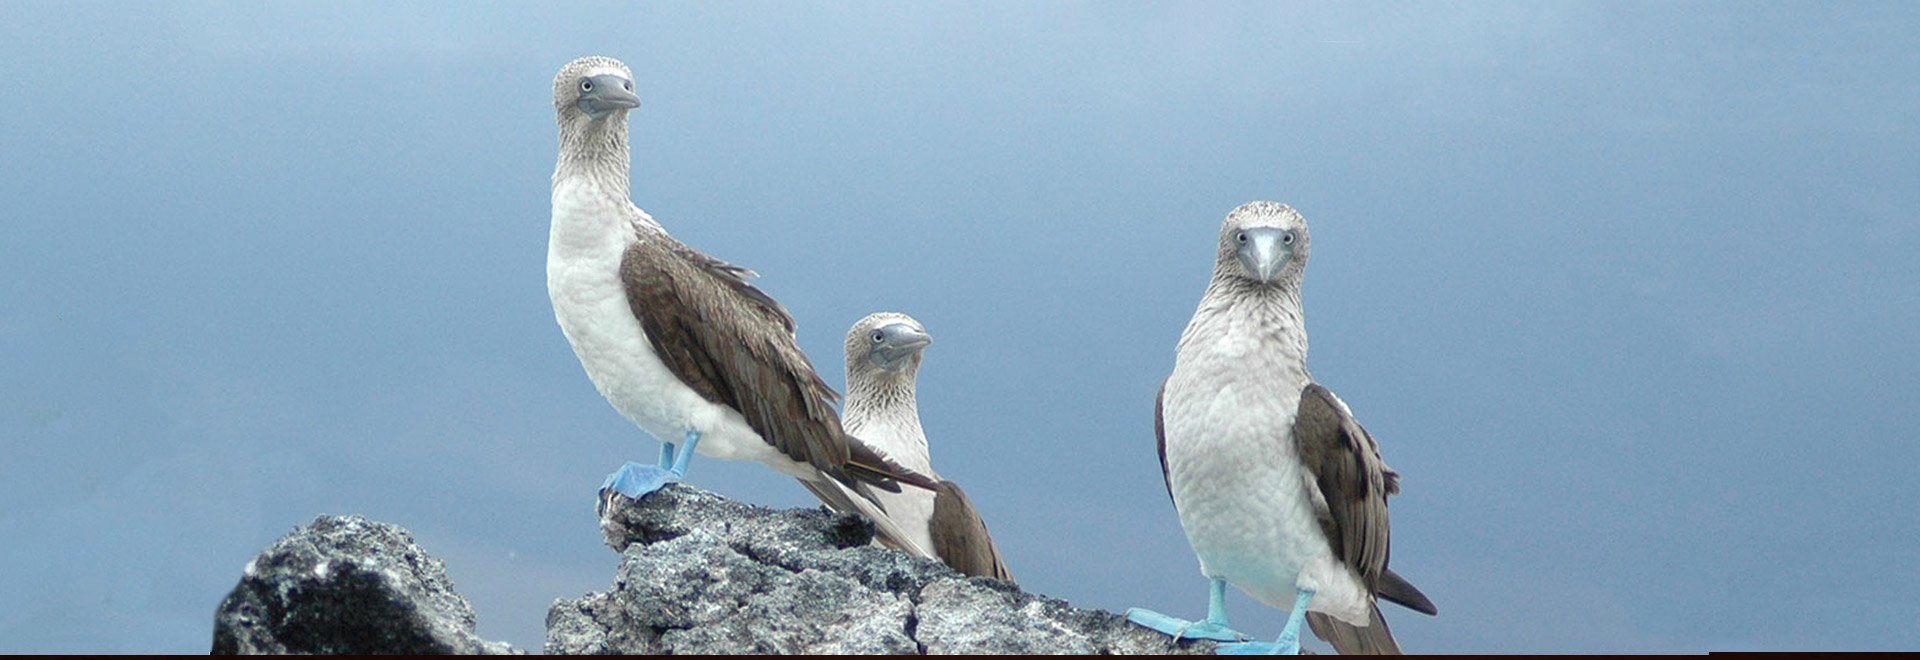 Americas Galapagos Wildlife Adventure Blue Footed Booby MH